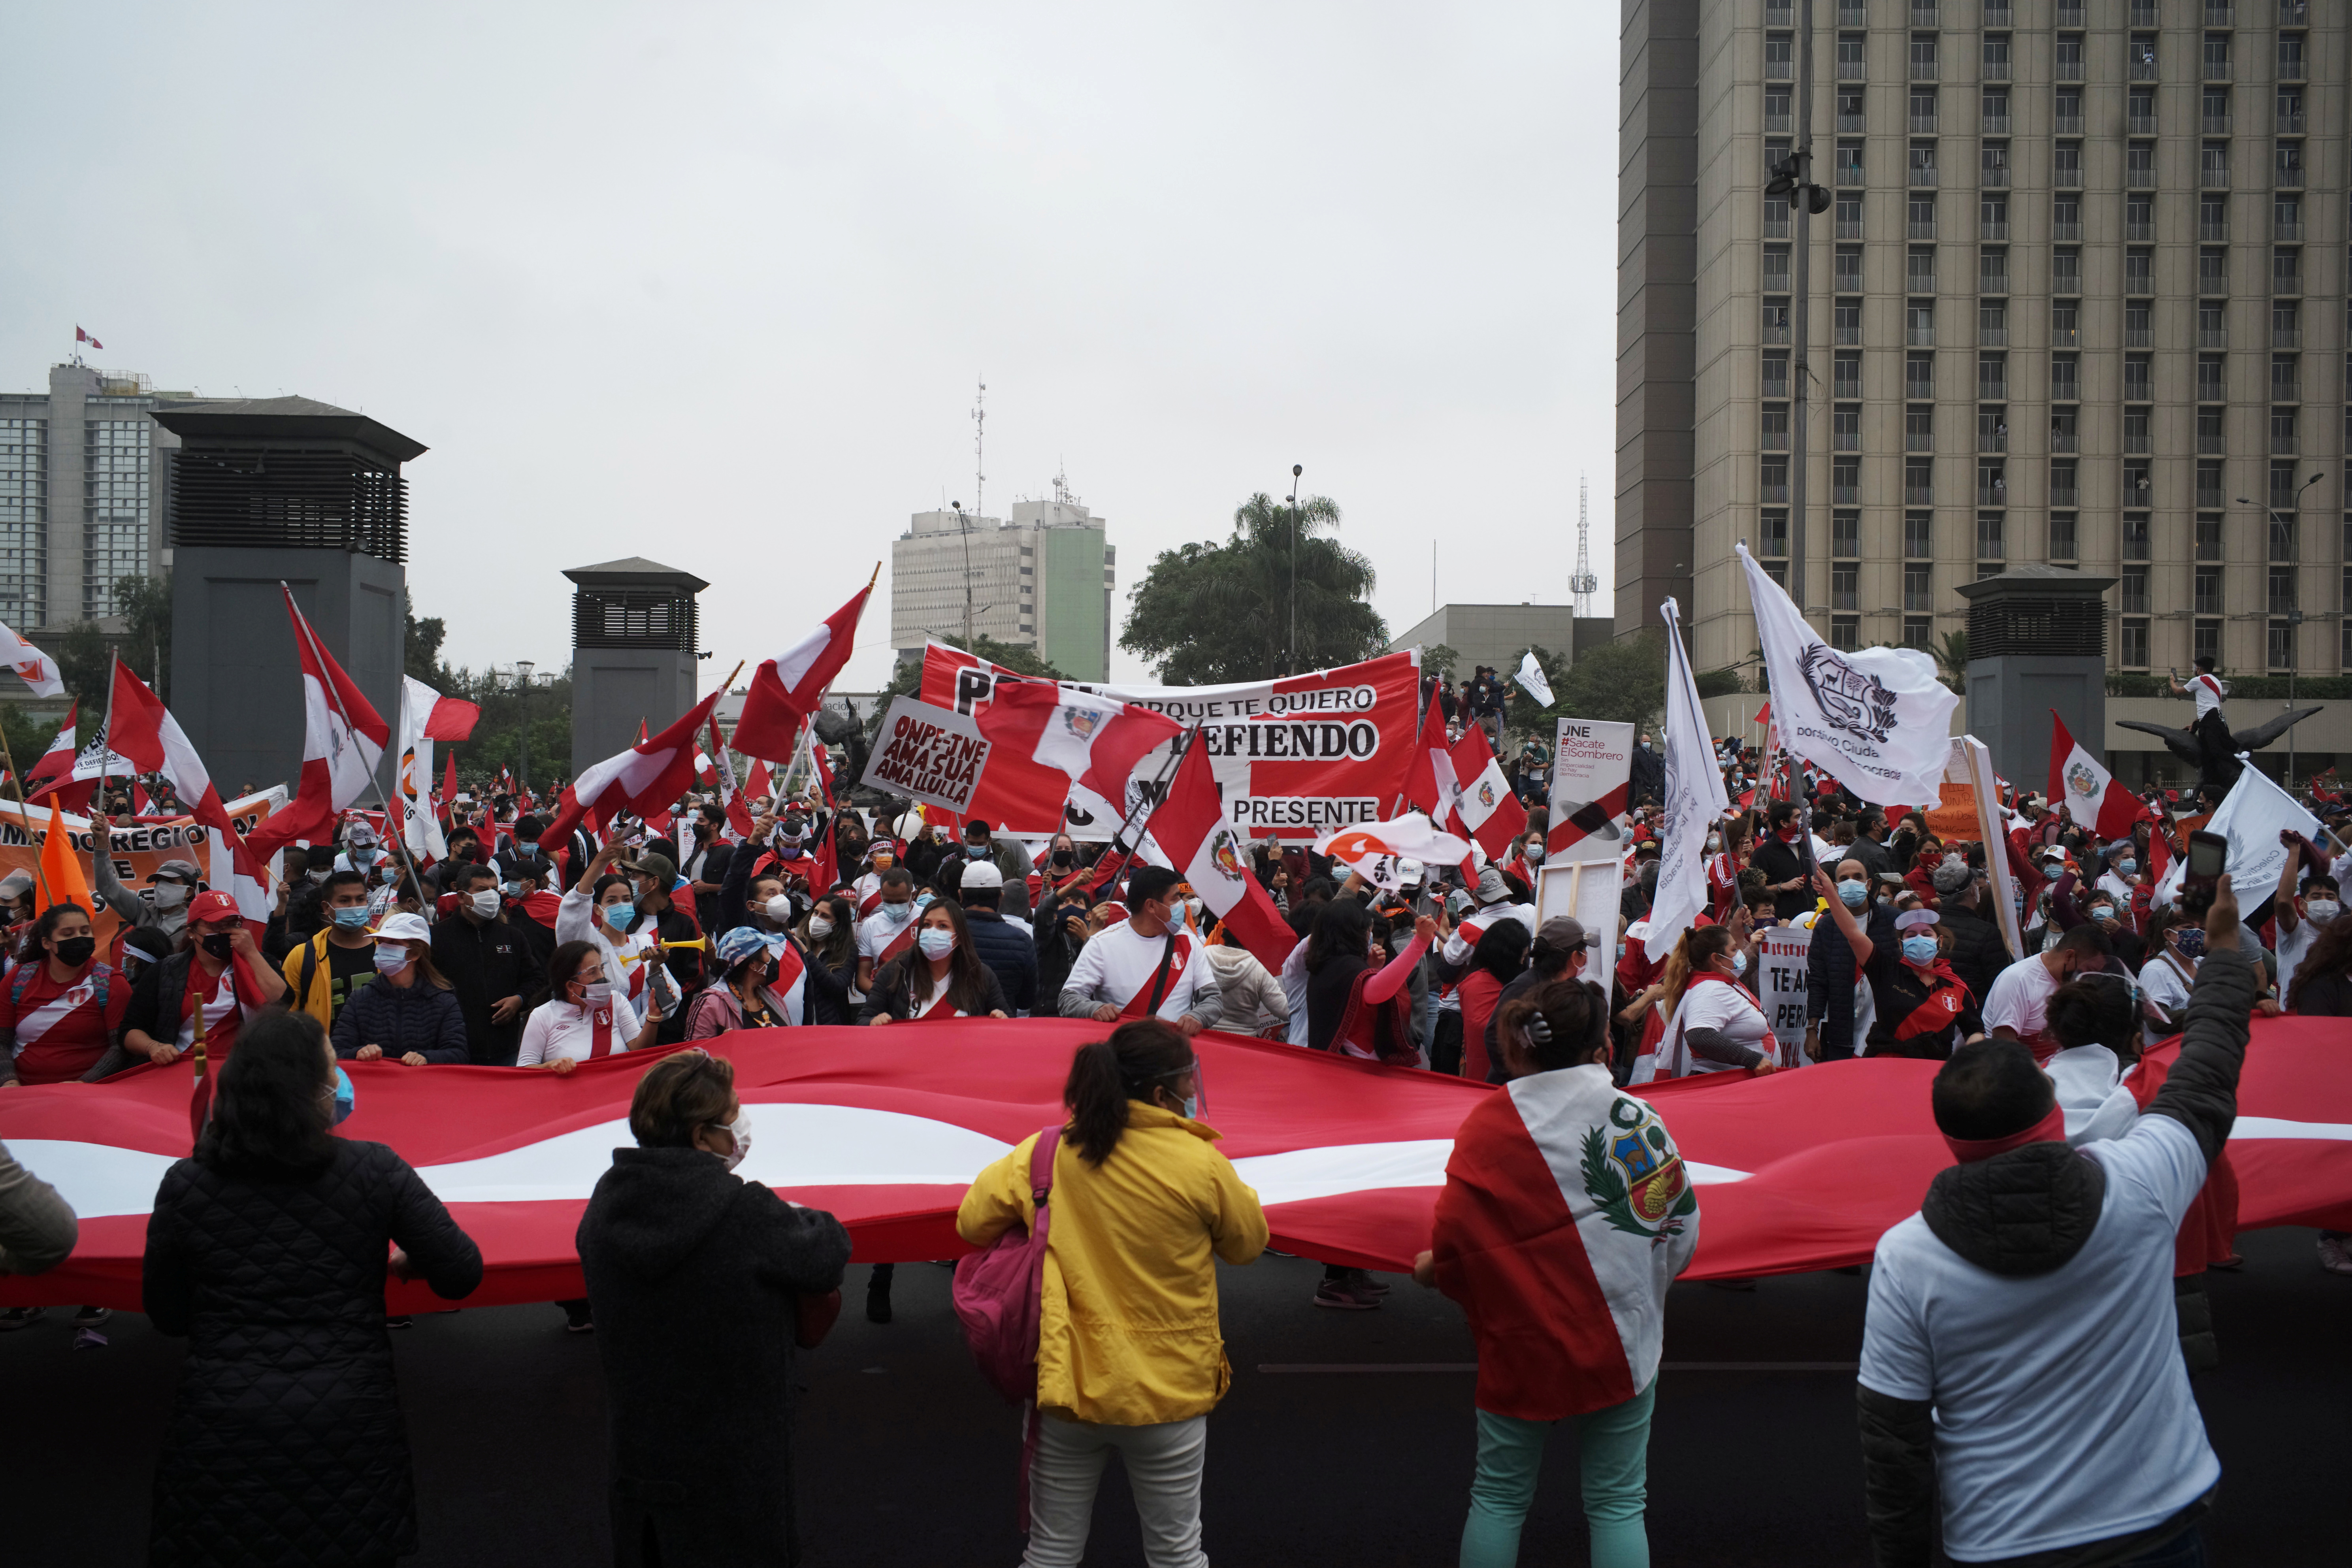 Supporters of Peru's presidential candidate Keiko Fujimori hold Peru's national flag while gathering outside the Palace of Justice, the seat of Peru's Supreme Court, during a demonstration in Lima, Peru June 12, 2021.  REUTERS/Alessandro Cinque